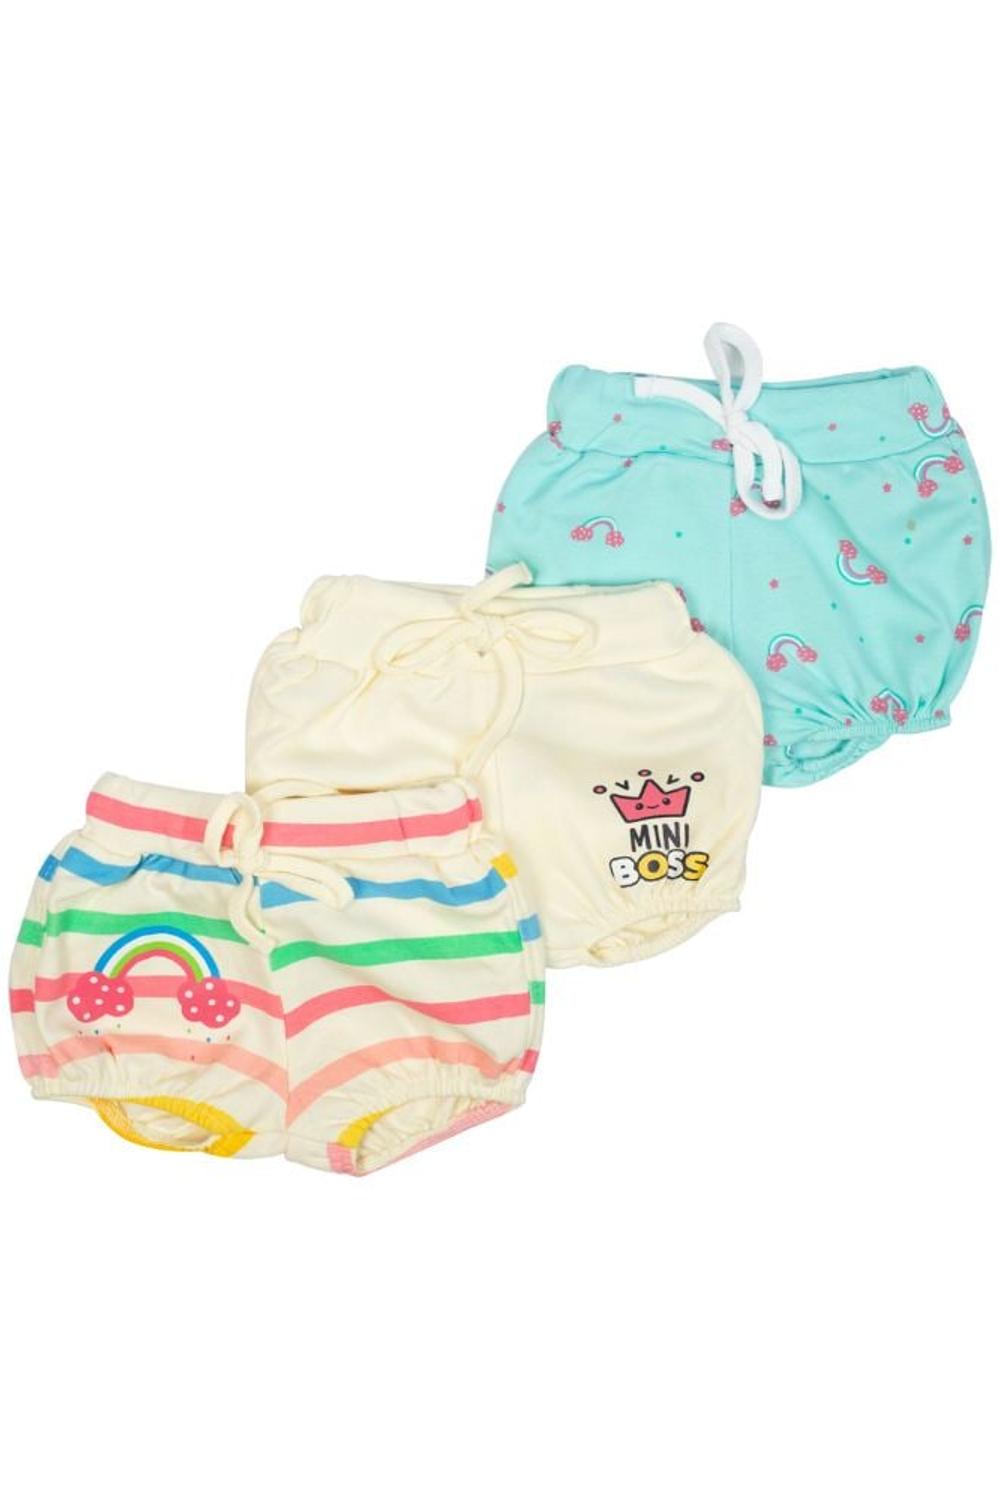 Mee Mee Baby Striped, Offwhite  Light Blue Shorts - Pack Of 3